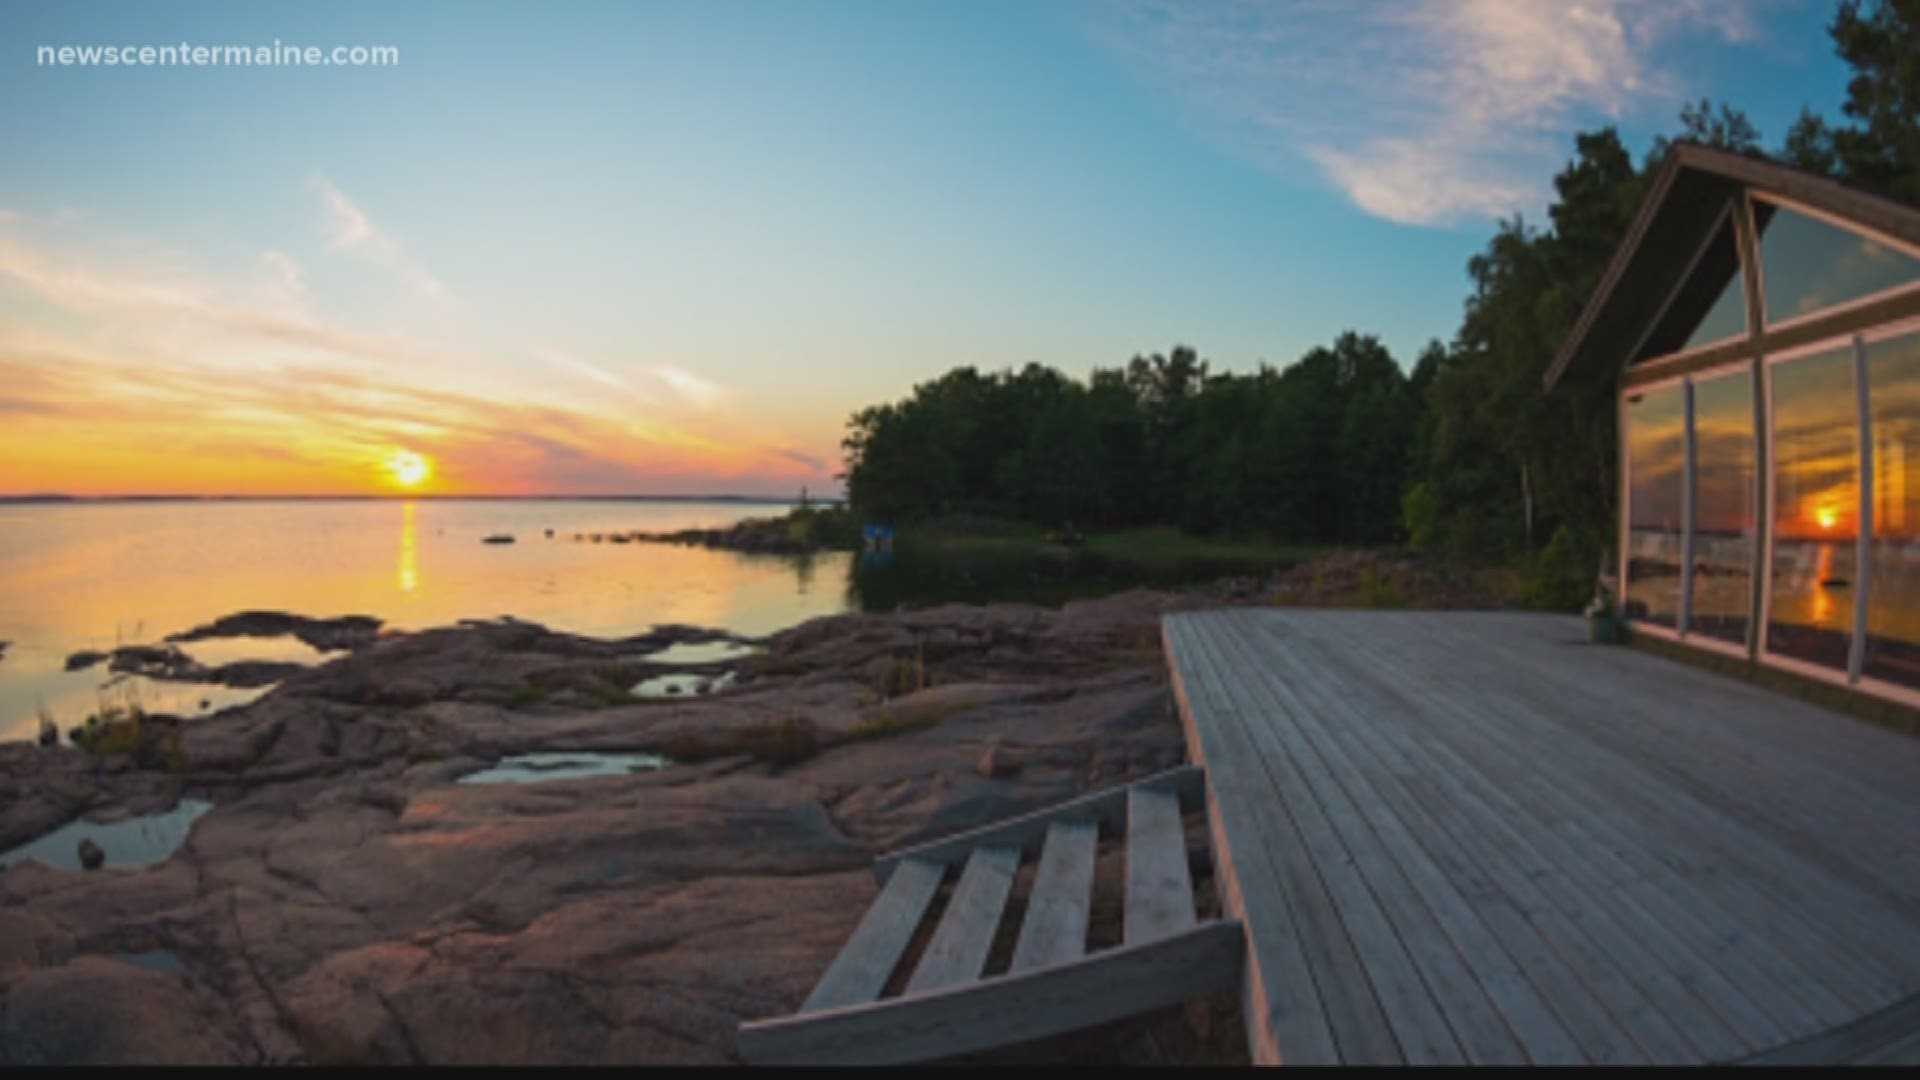 A new report says Maine is the top spot in the country for owning vacation homes.